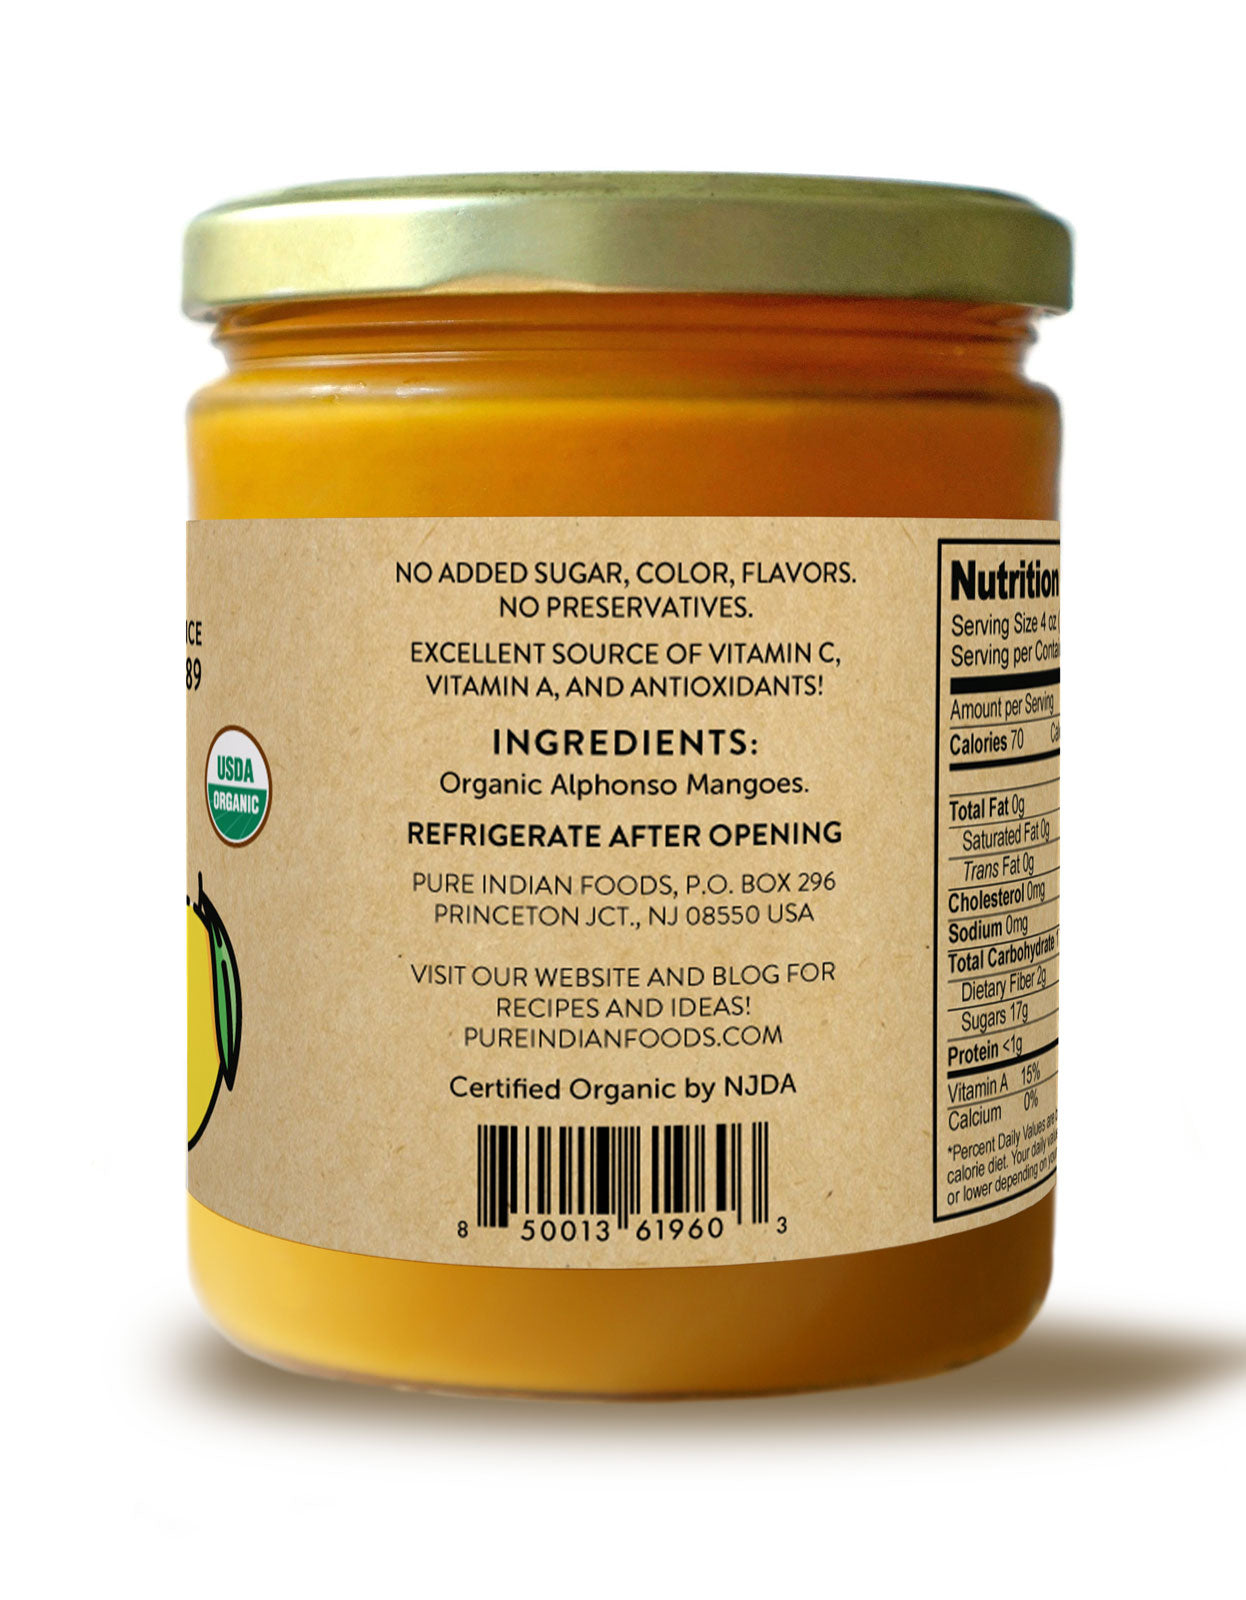 jar of alphonso mango puree containing 100% pure organic mango pulp. label says there's no added sugar, color, flavors, and no preservatives. excellent source of vitamin c, vitamin a, and antioxidants. refrigerate after opening.